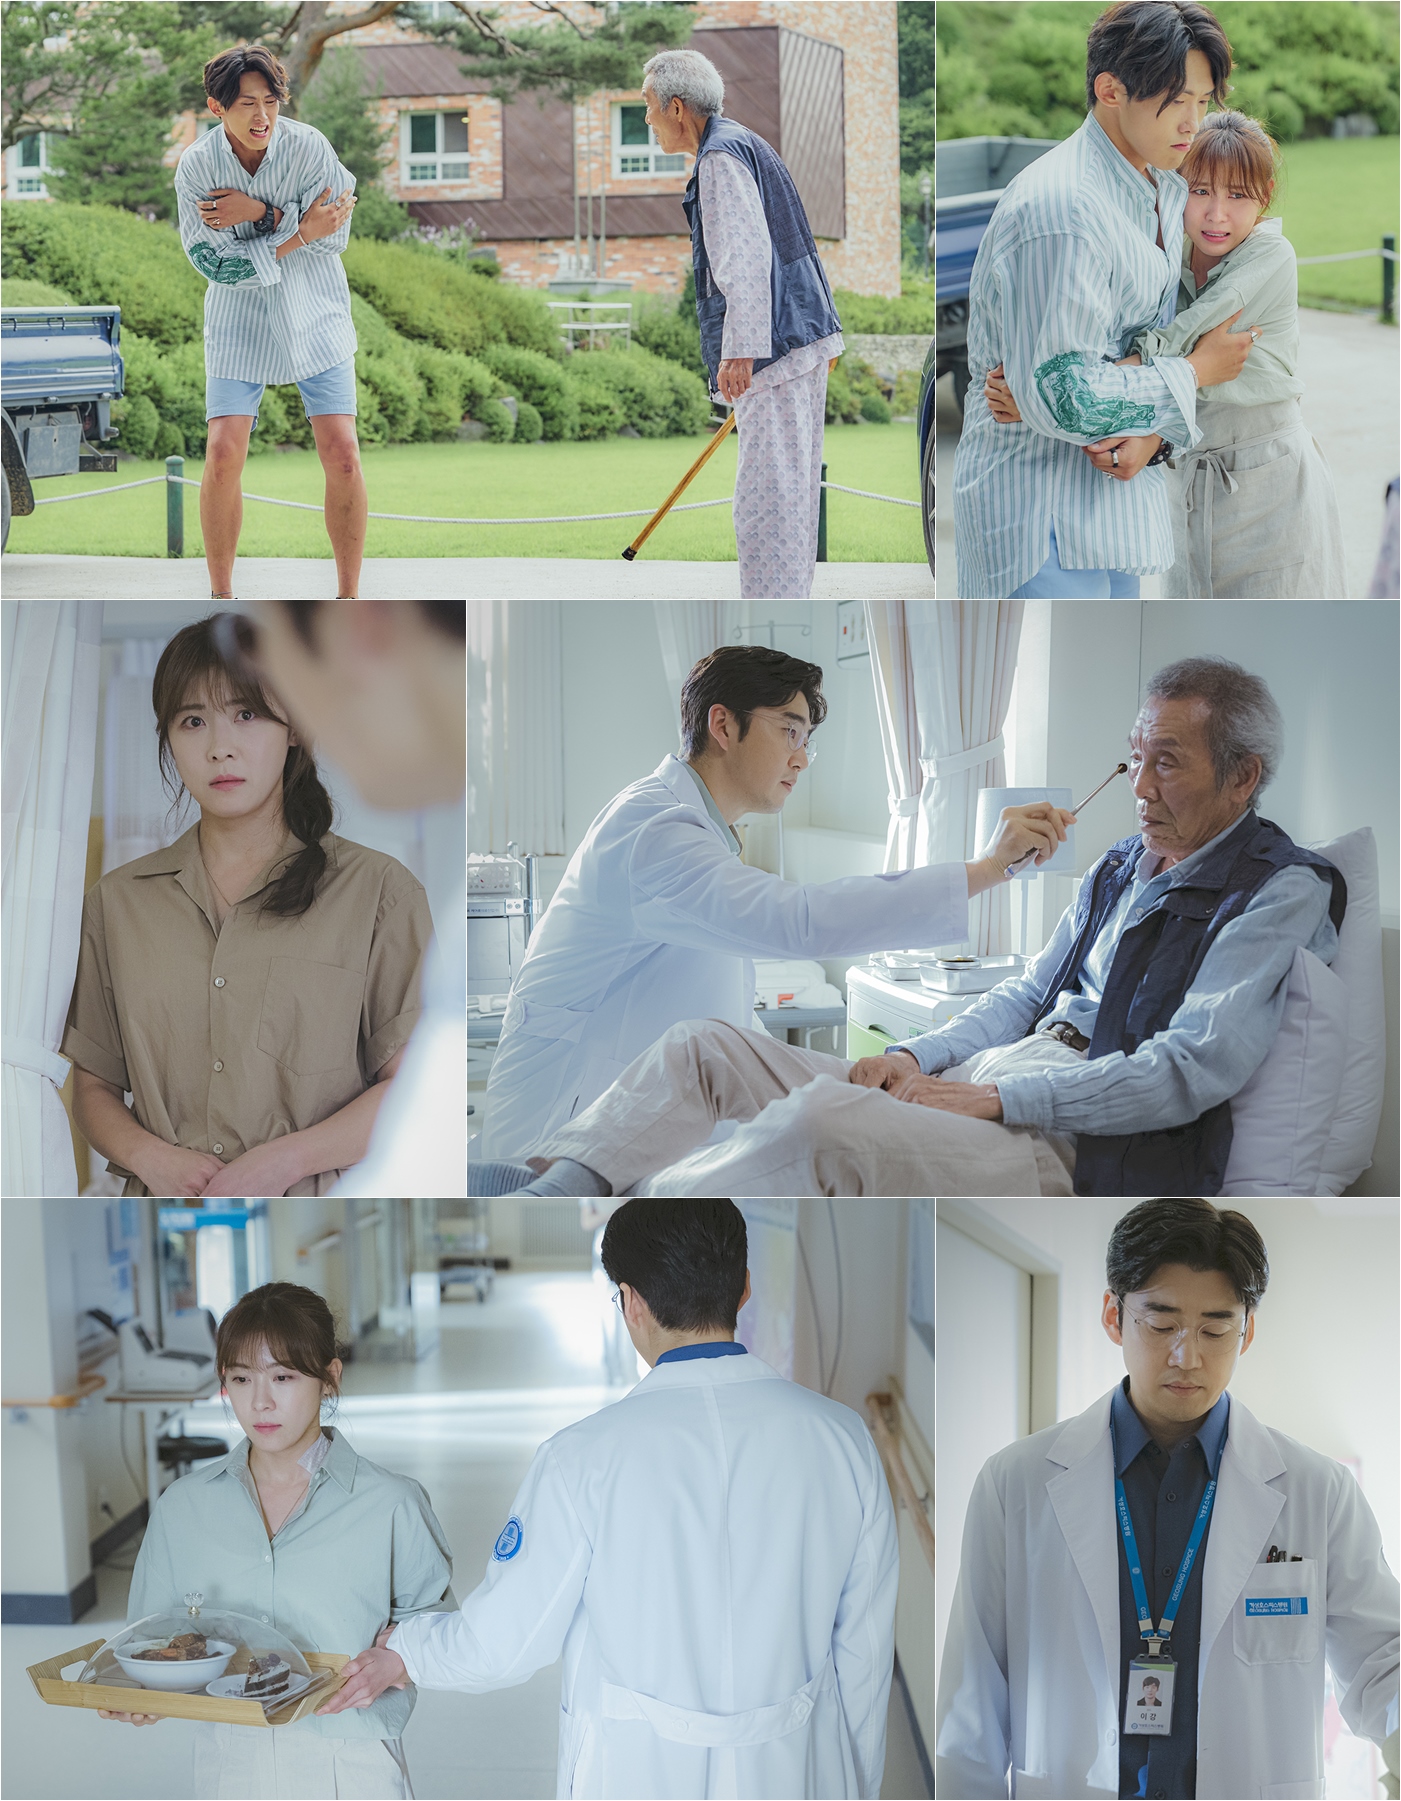 Chocolate Yoon Kye-sang and Ha Ji-won begin a new relationship.JTBCs Golden Earth Drama Chocolate (directed by Lee Hyung-min, playwright Lee Kyung-hee, production Drama House and JYP Pictures) caught the changed atmosphere of Yi Gang (Yoon Kye-sang) and Moon Cha-young (Ha Ji-won), who reunited at the Geosung Hospice on the 13th, ahead of the 5th broadcast, raising questions.Chocolate is a story of Lee Kang and Moon Cha-young, who continue to have a sad relationship even in the midst of constant staggering, which is causing a sweet and sour sensibility.The two men who had no time to face each other deeply, and the mind of Moon Cha-young toward the river became as deep as the way back from far, and the Miunderstock of the river deepened.Lee Kang and Moon Cha-young, who can not be separated, reunited at the Geosung hospice hospital and announced a new start.In the meantime, the photos show Lee Kang and Moon Cha Young, who started a new life in the hospice ward.Moon Tae-hyun (Min Jin-woong), a brother of an accident bundle who is confronted with the staff of Kim No-in (Oh Young-soo), a patient of a mammoth hospice of a giant hospice.Moon Cha-young, who blocked them with a difficult expression, stimulates curiosity. Lee Gang, who was moved to a giant hospice due to the aftermath of a traffic accident, was also caught.Lee Gang and Moon Cha-young, who were reunited as doctors and chefs of the giant hospice, and Moon Cha-young, who carefully treats Kim No-in, leaks out mixed Feelings.The complex Feeling also flashes in the eyes of Lee Gang, who catches Moon Cha-young passing through the corridor of the hospital room.The relationship between Lee Kang and Moon Cha Young, which starts again, gives a different color and temperature.In order to save Moon Cha-young in a traffic accident, he missed his golden time and had a fatal aftereffect as a doctor.Attention is focusing on whether Lee Gang, whose wounds and loneliness have deepened due to the death of Kwon Min-sung (Yoo Tae-oh), and Moon Cha-young, who still has a feeling for him, will be able to approach each other this time.In the fifth episode that is broadcast today, changes come to Lee Gang and Moon Cha-young, who have been reunited at the giant hospice.The two people who had been so deeply divided and so different from each other as they came back will finally face each other, he said. With the change in the relationship between Lee and Moon Cha-young, the stories of hospice patients with different stories are added and they give another fun.JTBCs Drama Chocolate will air at 10:50 p.m. today (13th).